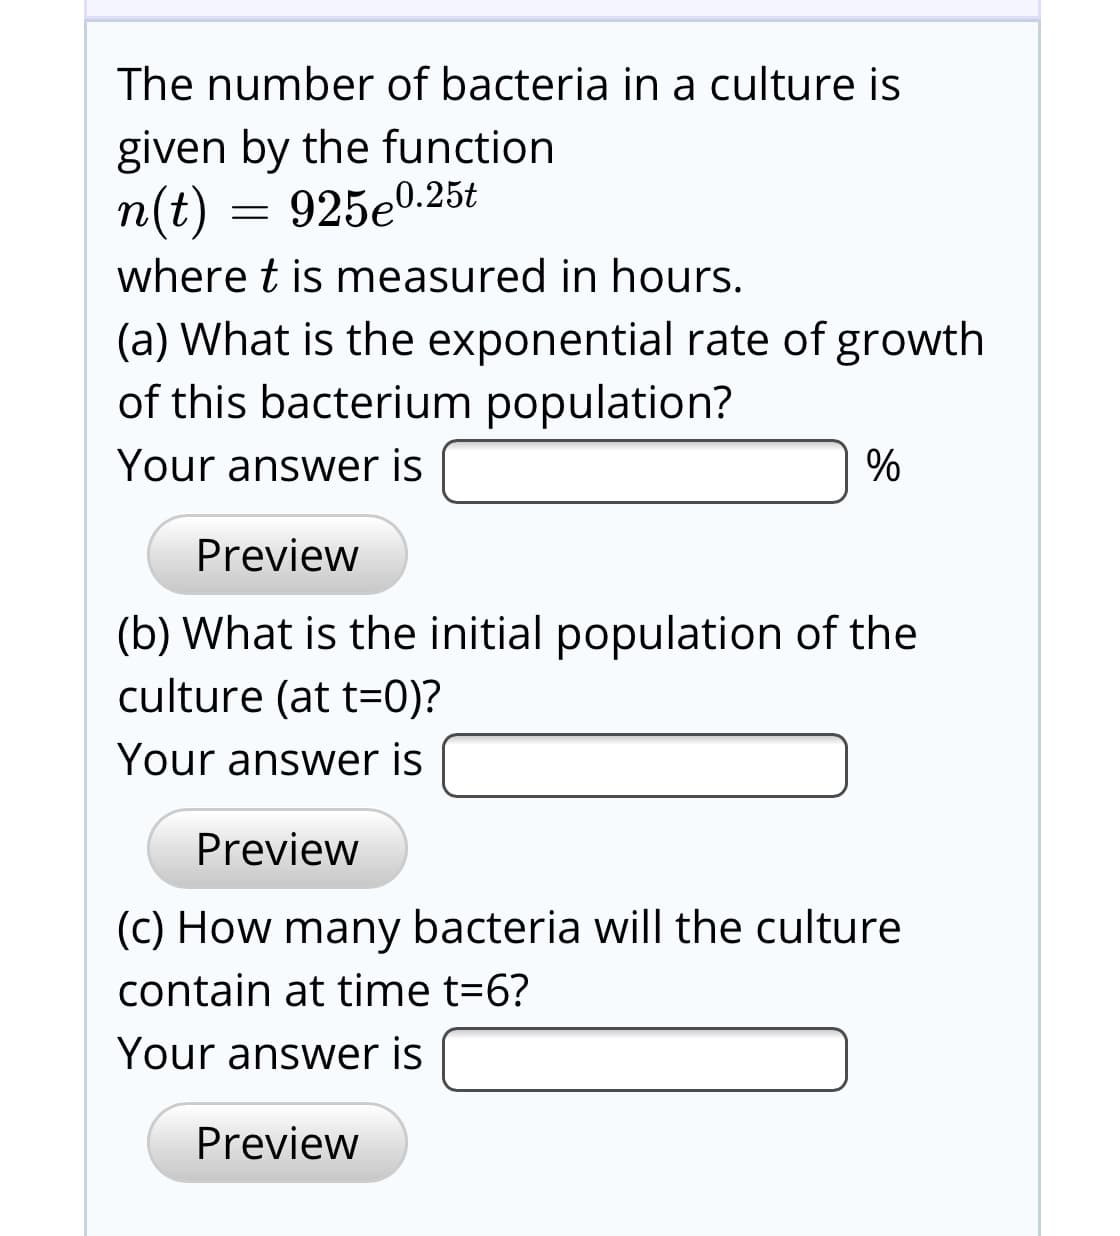 The number of bacteria in a culture is
given by the function
n(t) = 925e0.25t
where t is measured in hours.
(a) What is the exponential rate of growth
of this bacterium population?
Your answer is
Preview
(b) What is the initial population of the
culture (at t=0)?
Your answer is
Preview
(C) How many bacteria will the culture
contain at time t=6?
Your answer is
Preview
